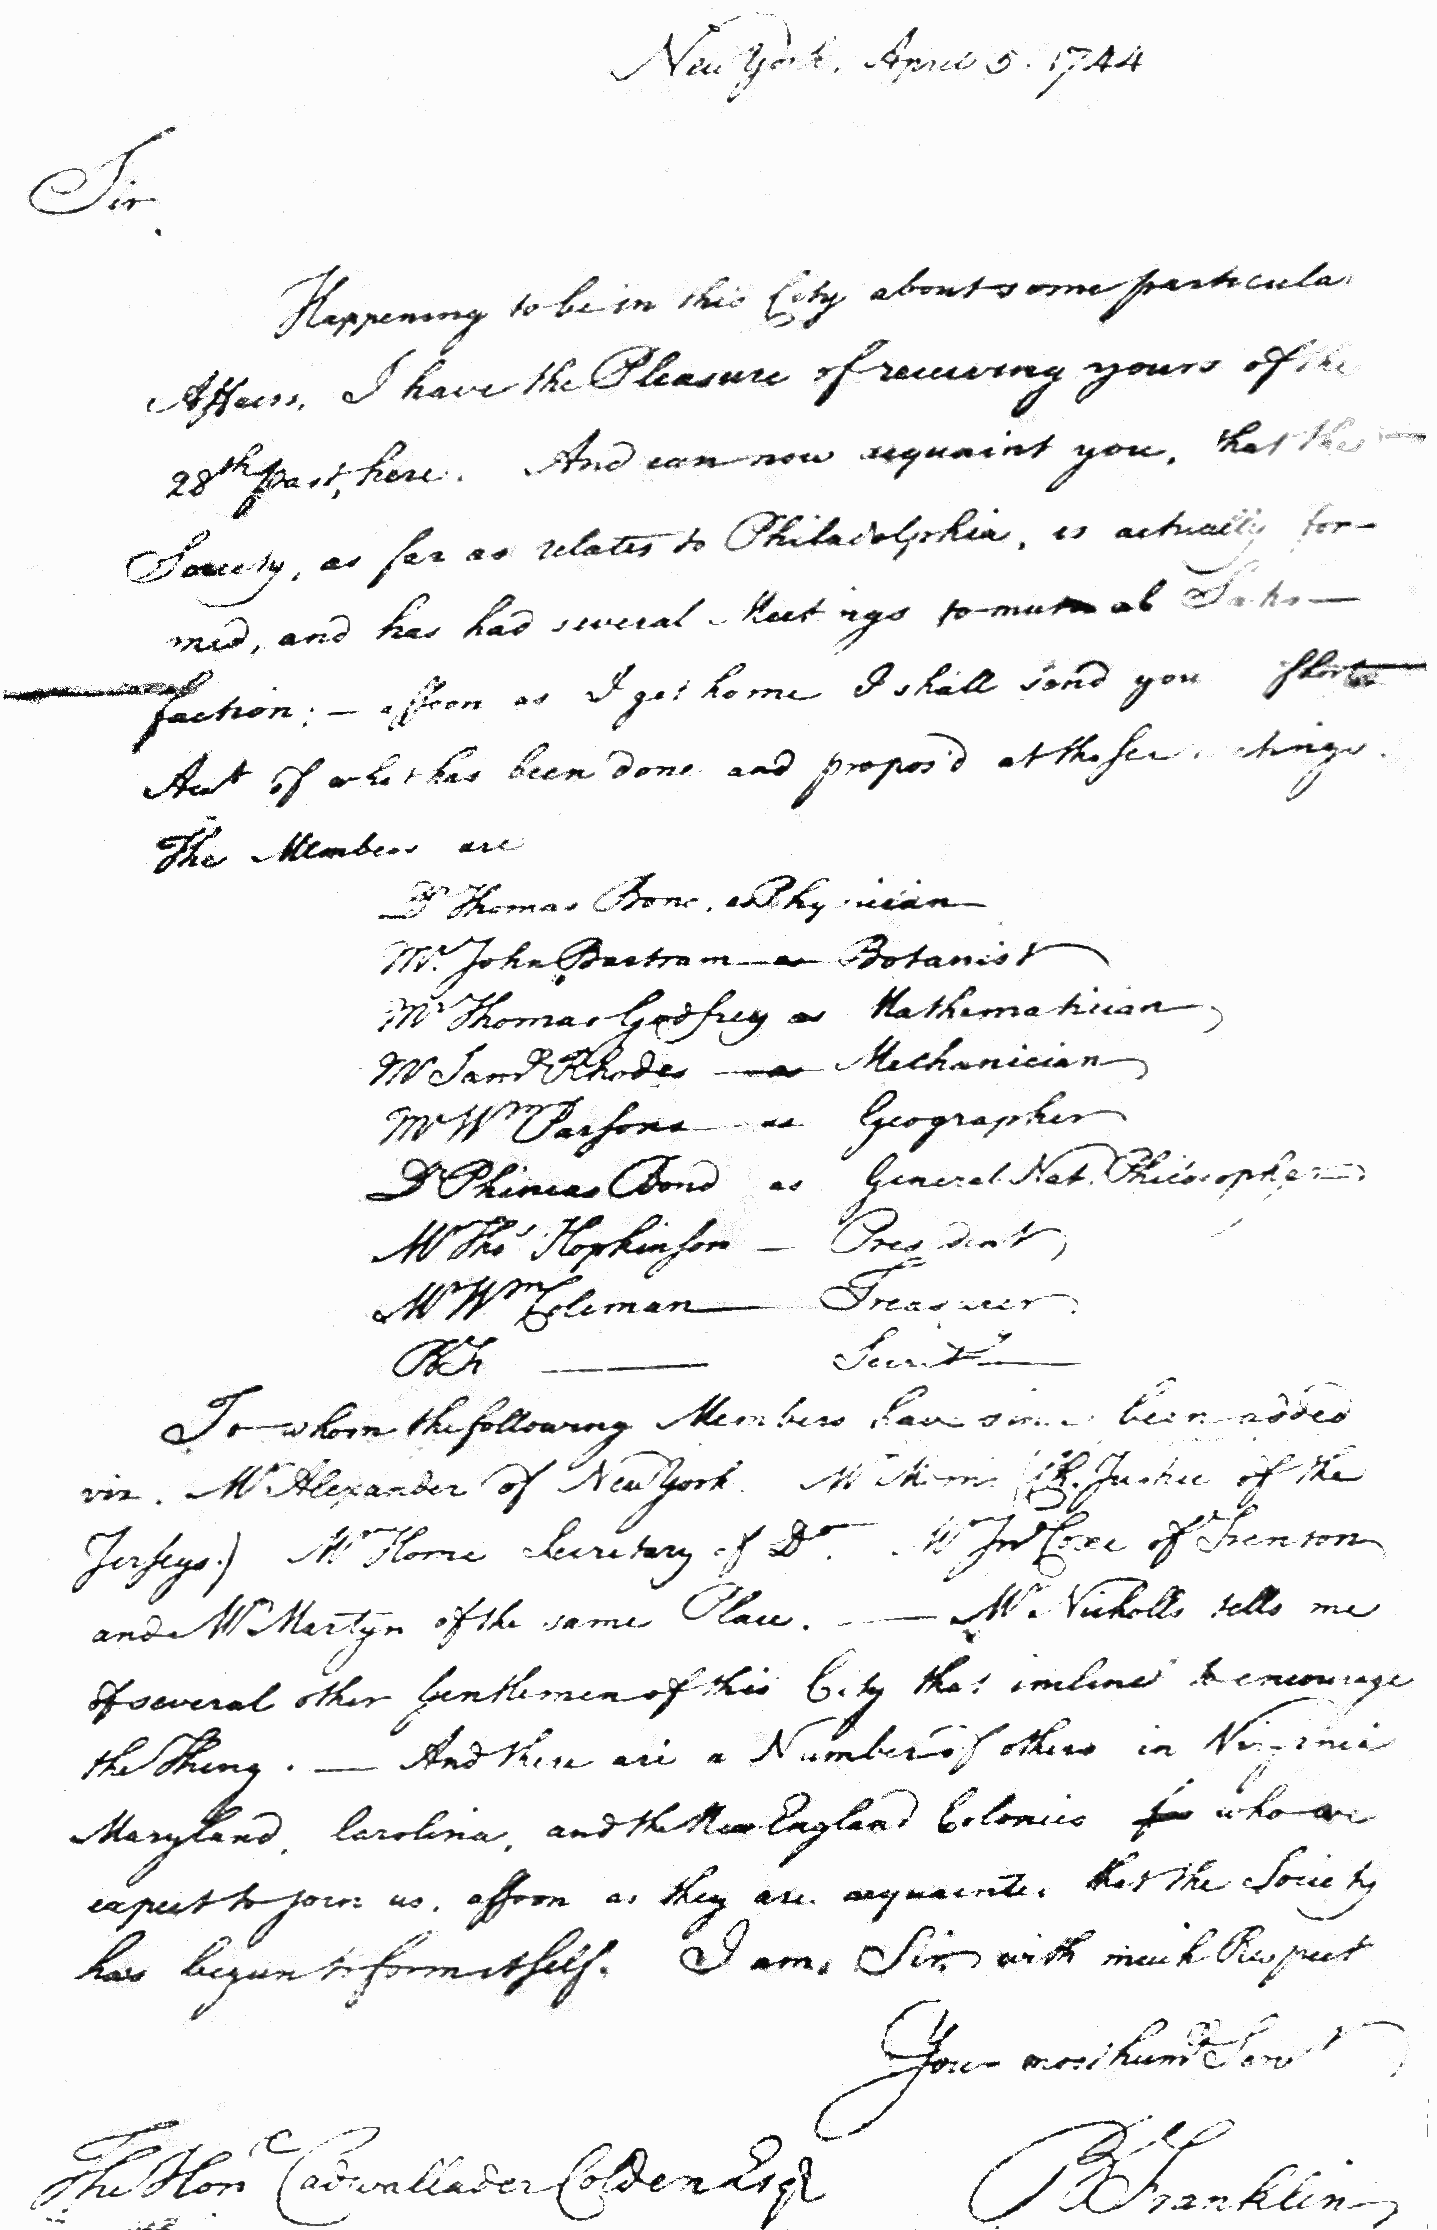 Letter from Father Page 4.png